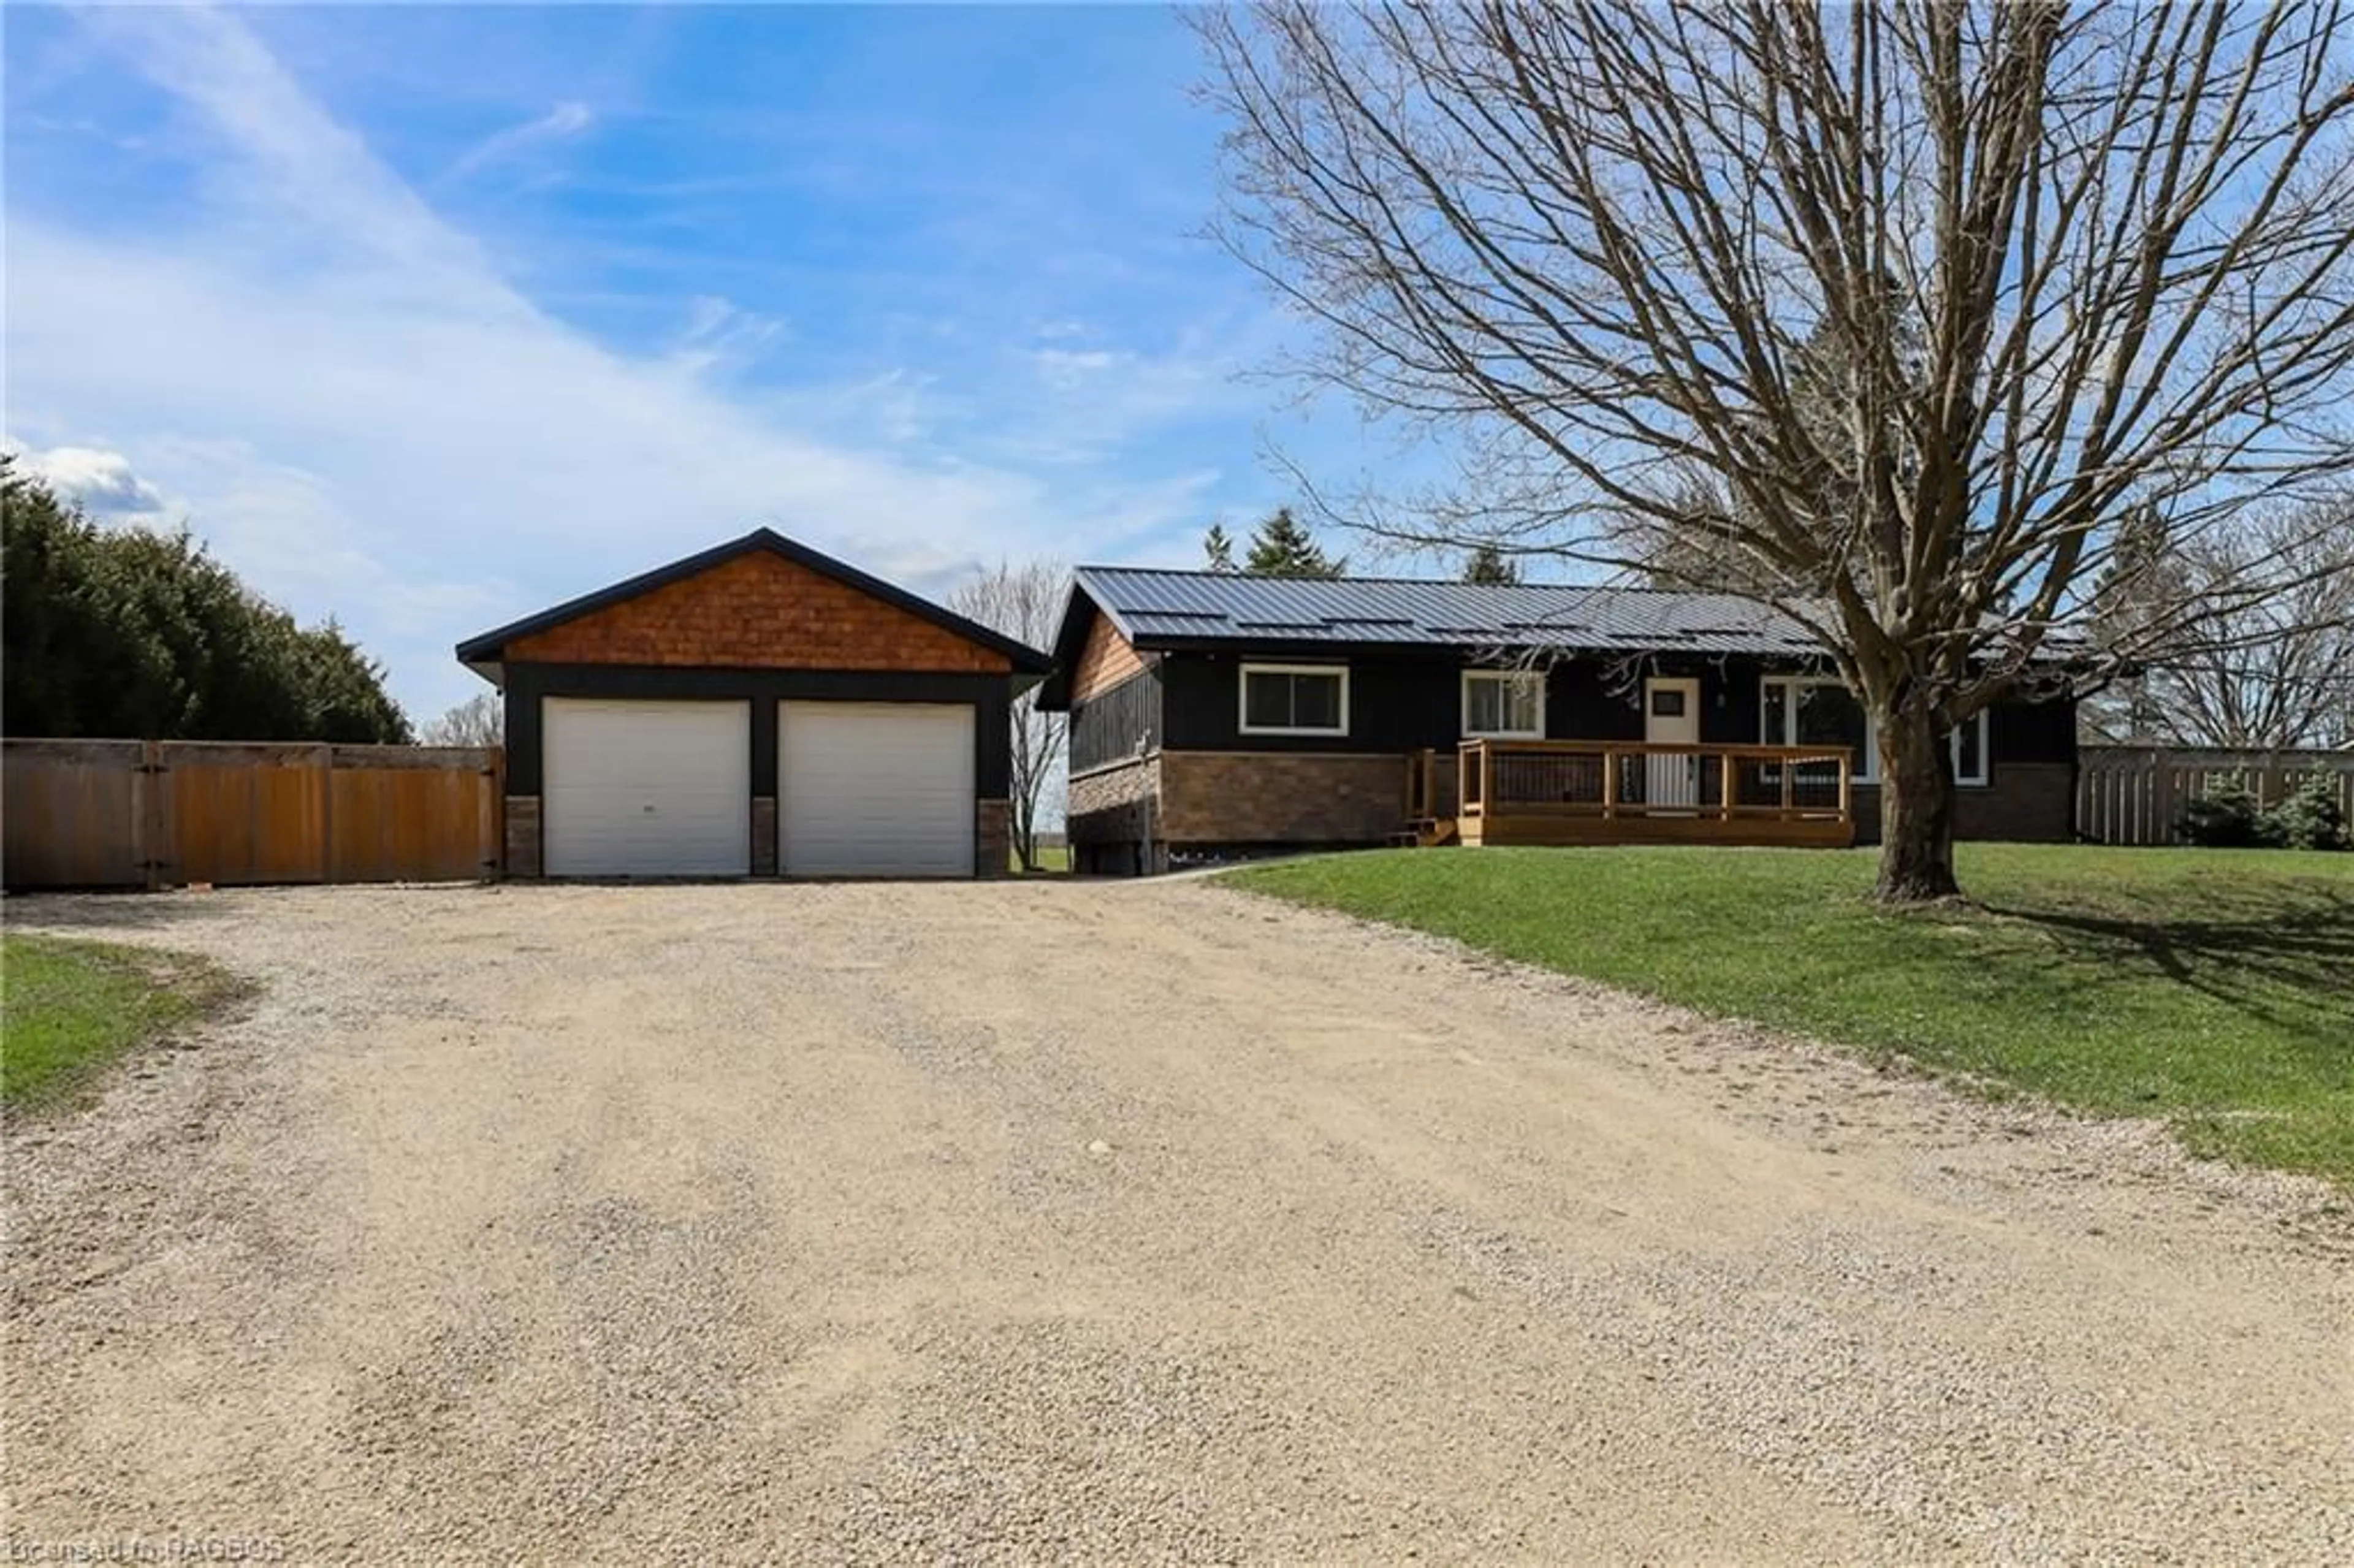 Frontside or backside of a home for 614506 Hamilton Lane, West Grey Ontario N0C 1H0